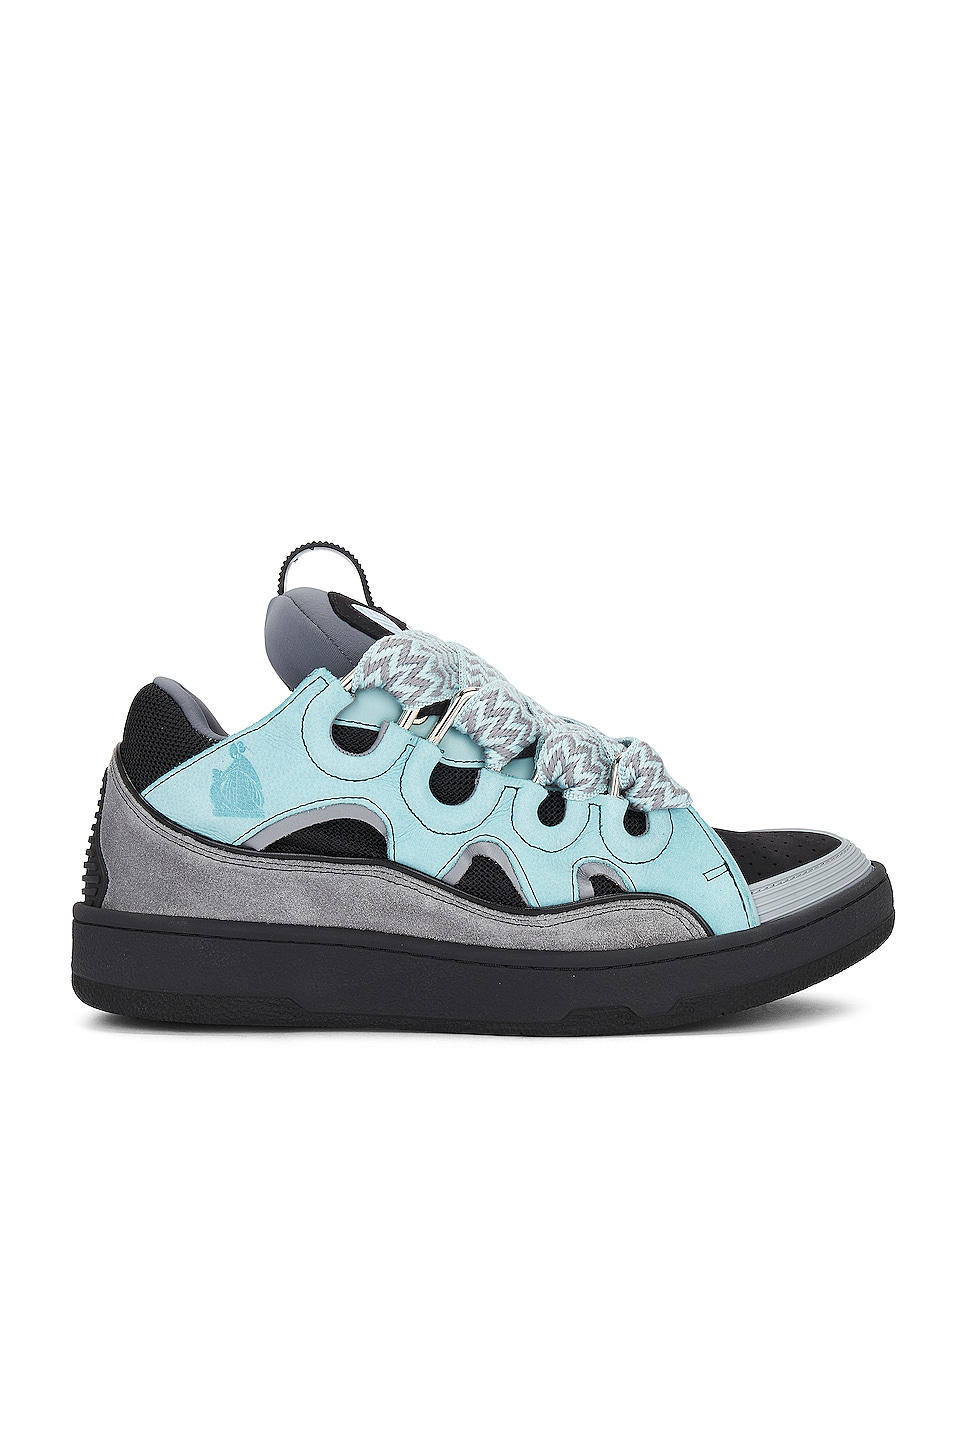 Image 1 of Lanvin Curb Sneaker in Light Blue & Anthracite